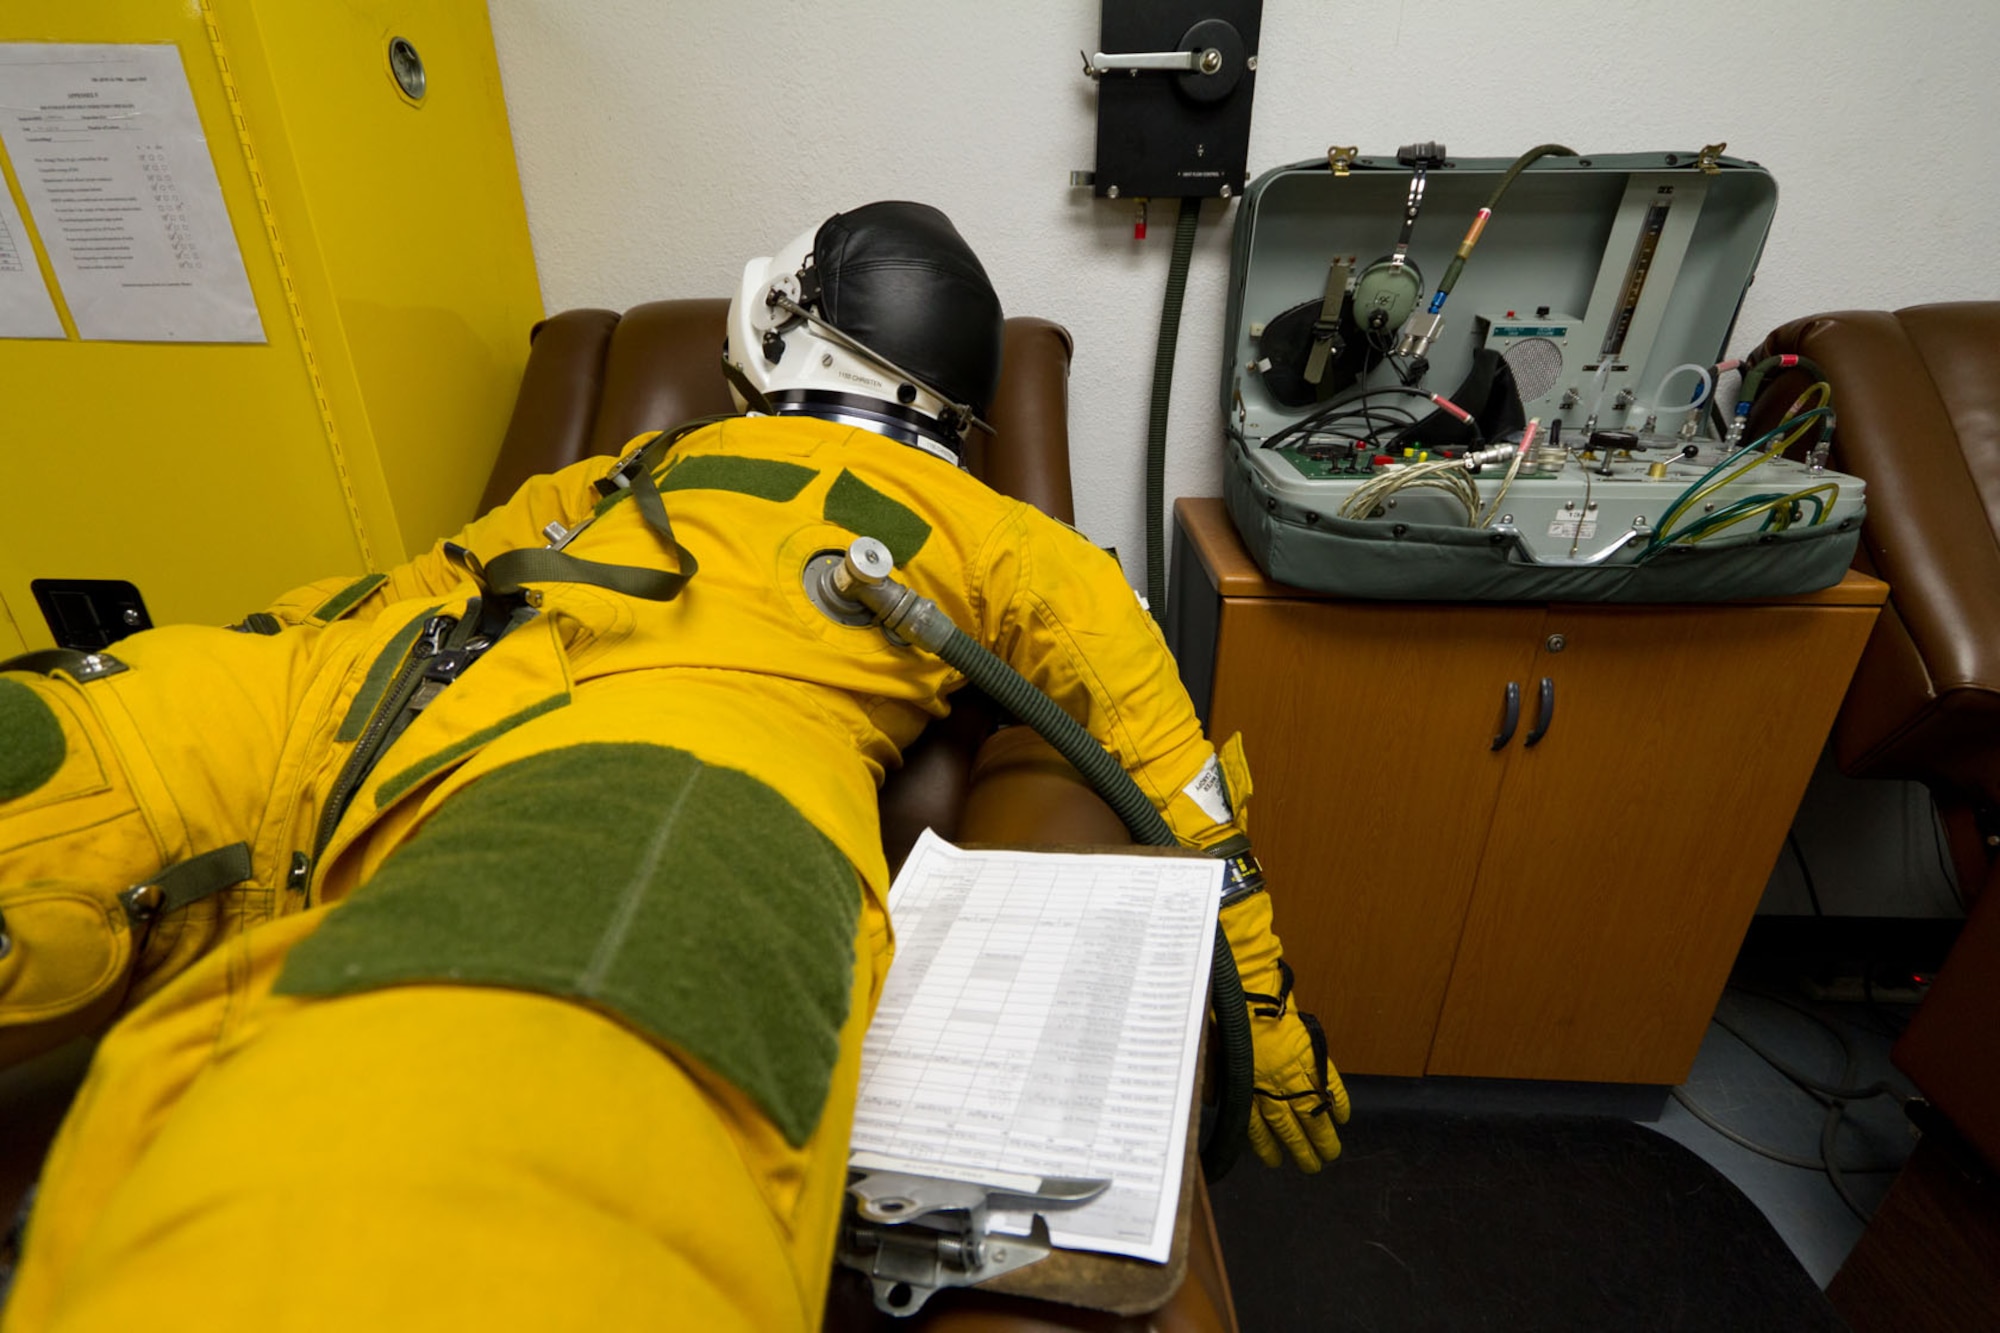 SOUTHWEST ASIA - A U-2 full-pressure suit is filled with air after a flight to dry it July 17, 2012. The suit must then be maintained in a temperature- and humidity-controlled environment to prevent damage. (U.S. Air Force photo/Senior Airman Alexander Recupero)